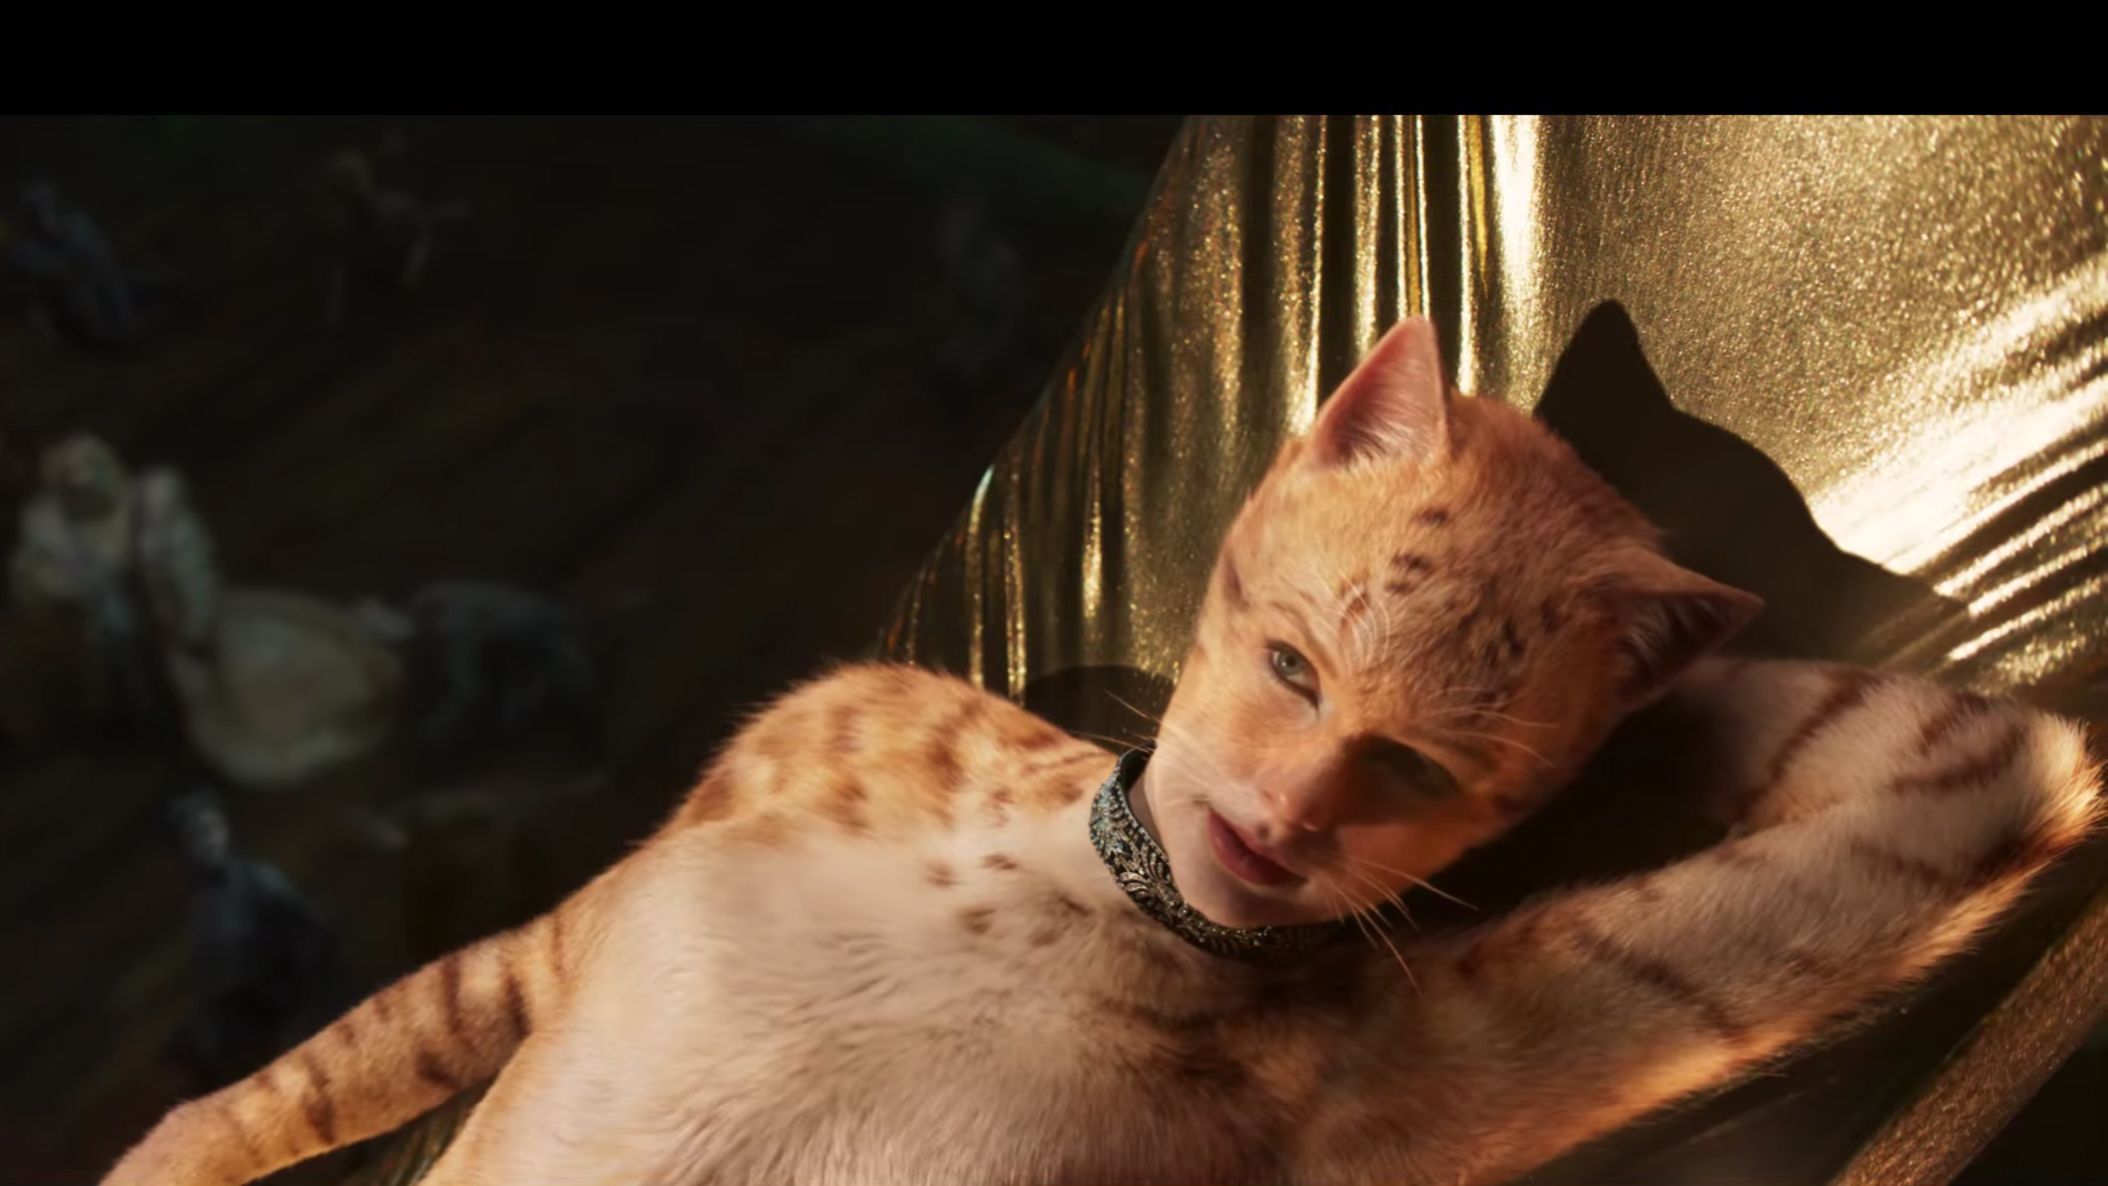 Watch stars in the new 'Cats' movie trailer | CNN Business